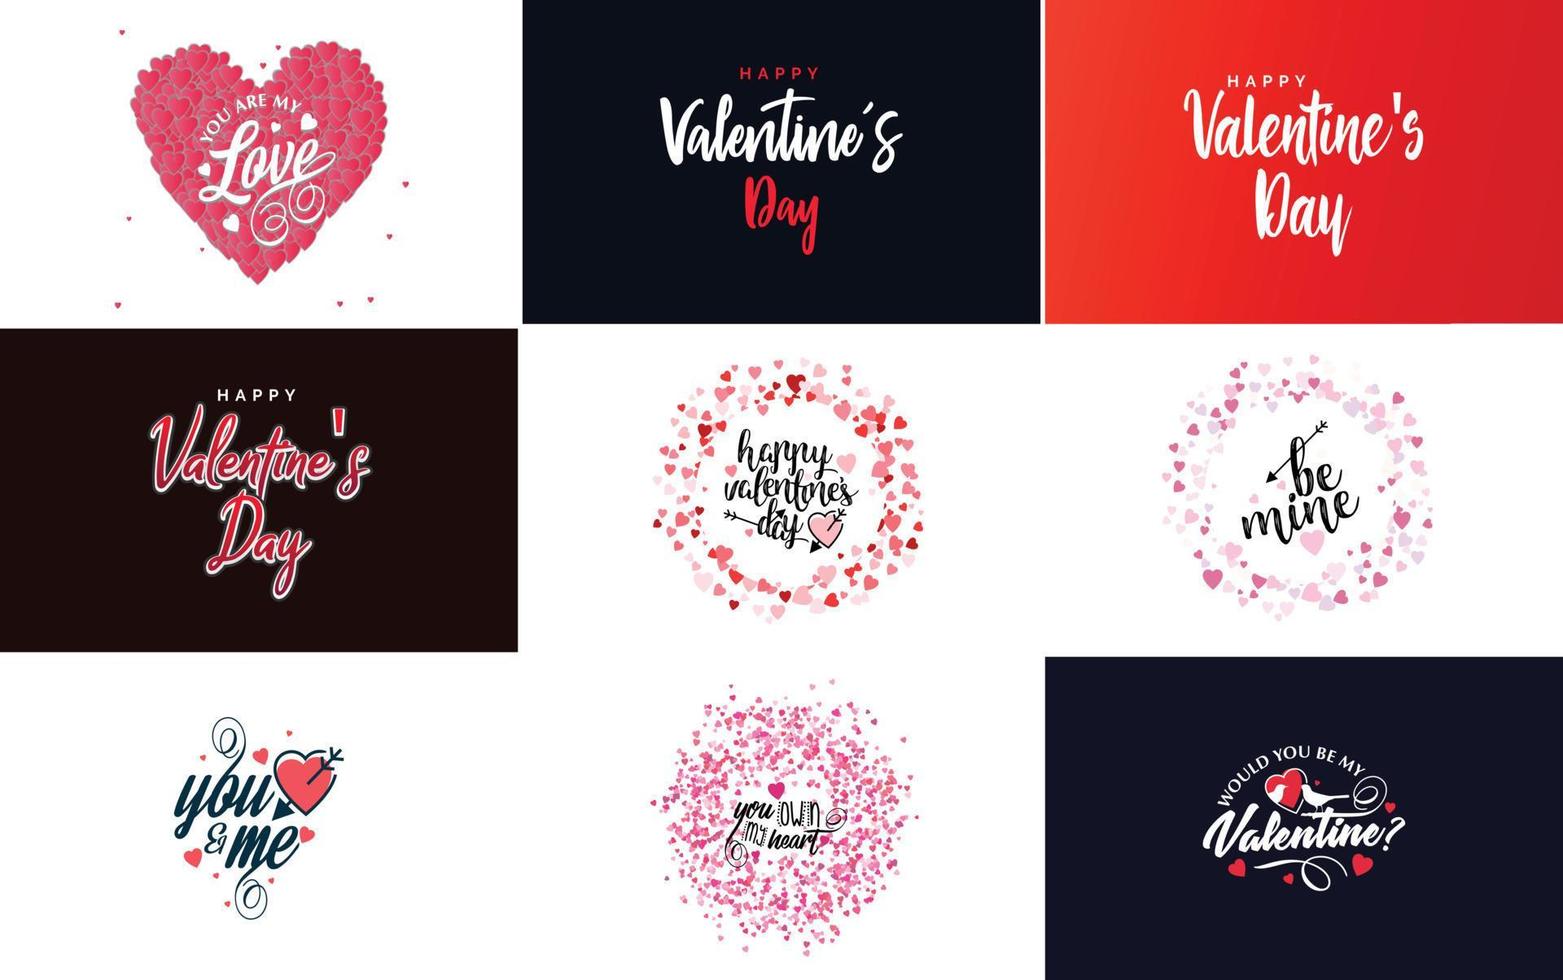 Happy Valentine's Day hand lettering calligraphy text and hearts vector